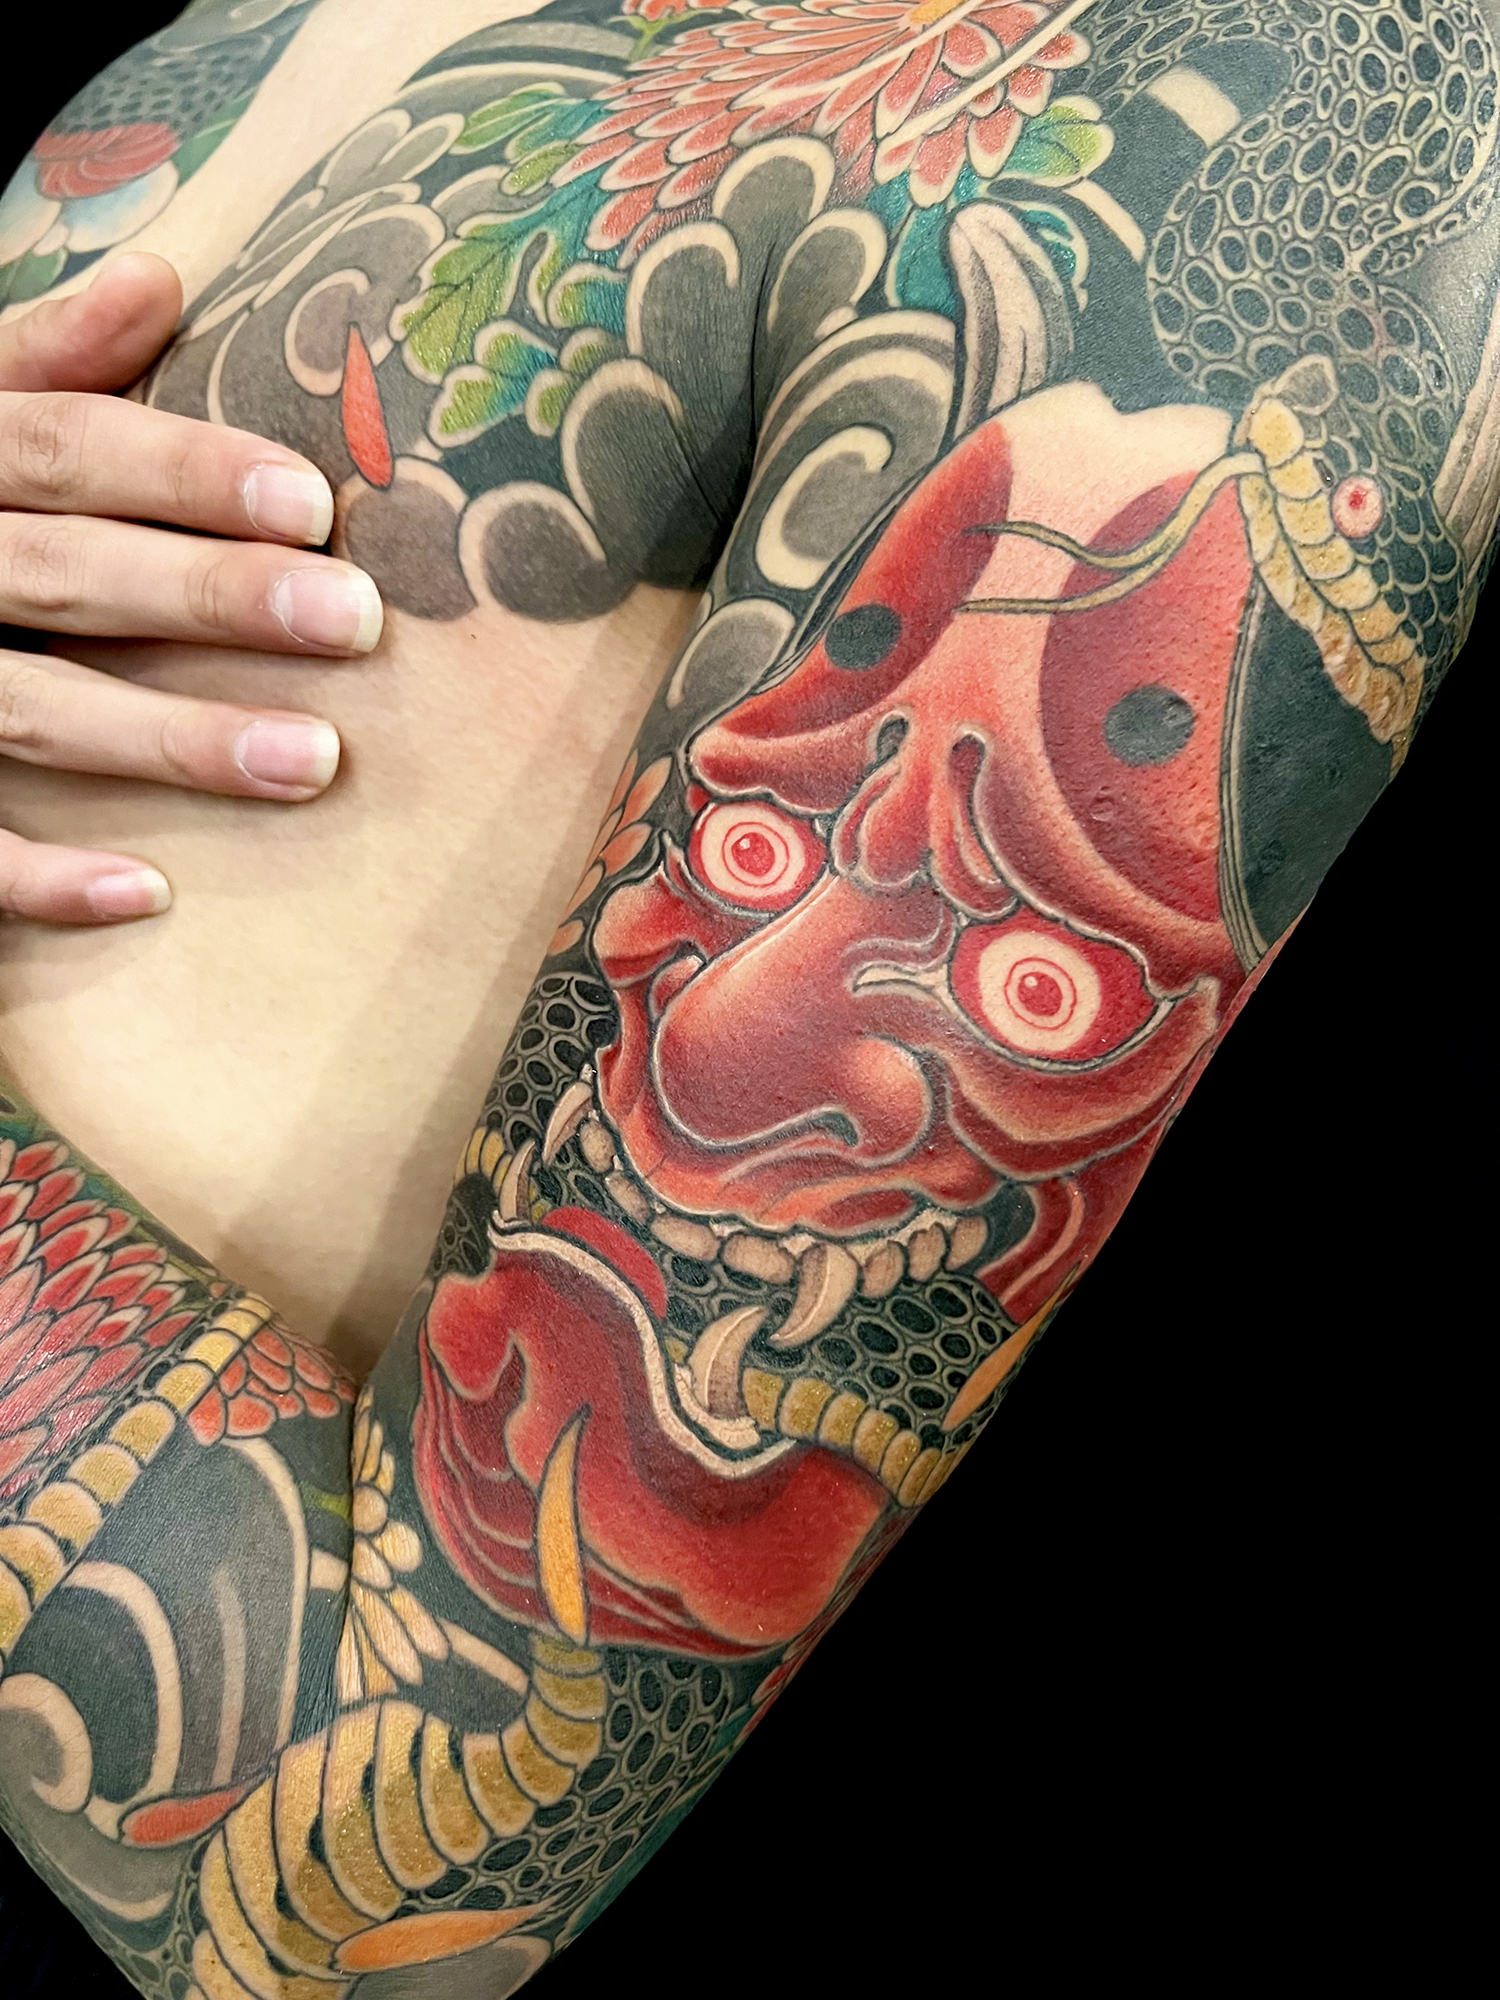 A tattoo depicting a Hannya mask from Japanese Noh theater.